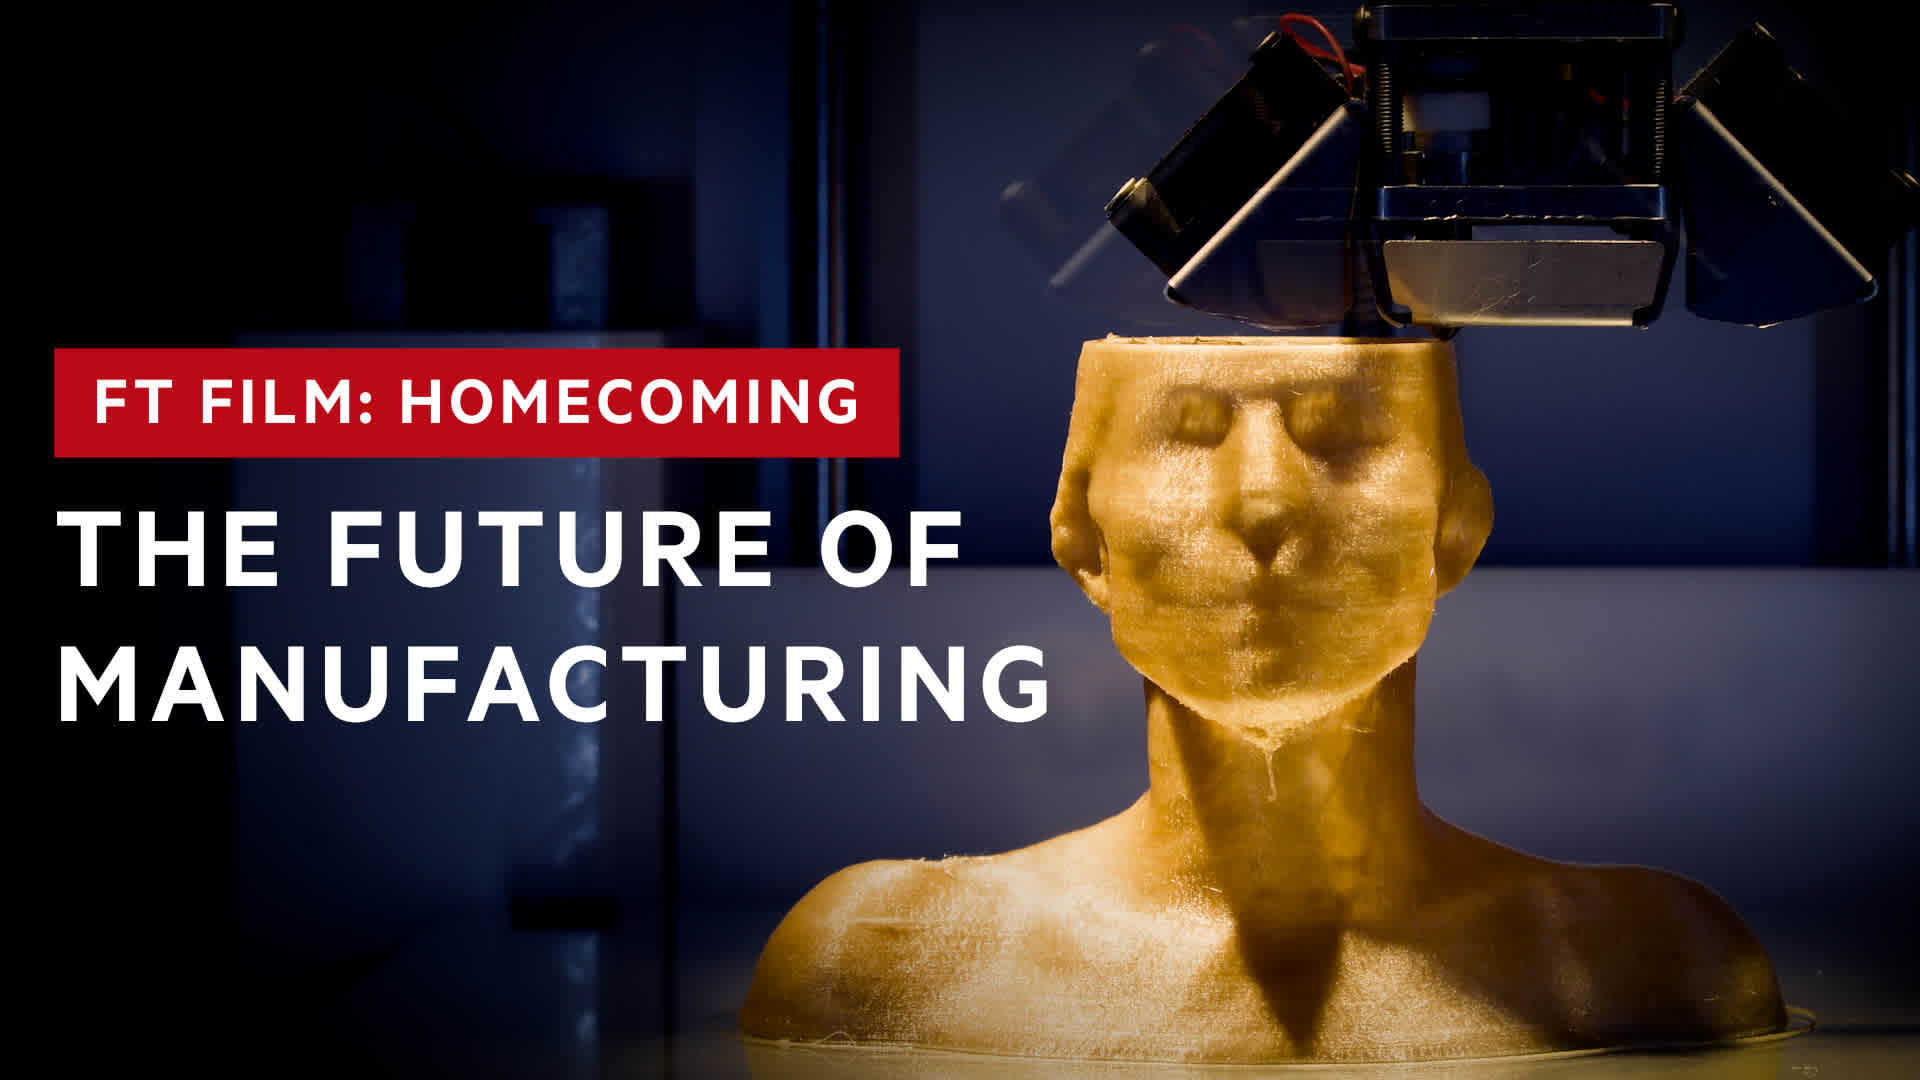 The future of manufacturing